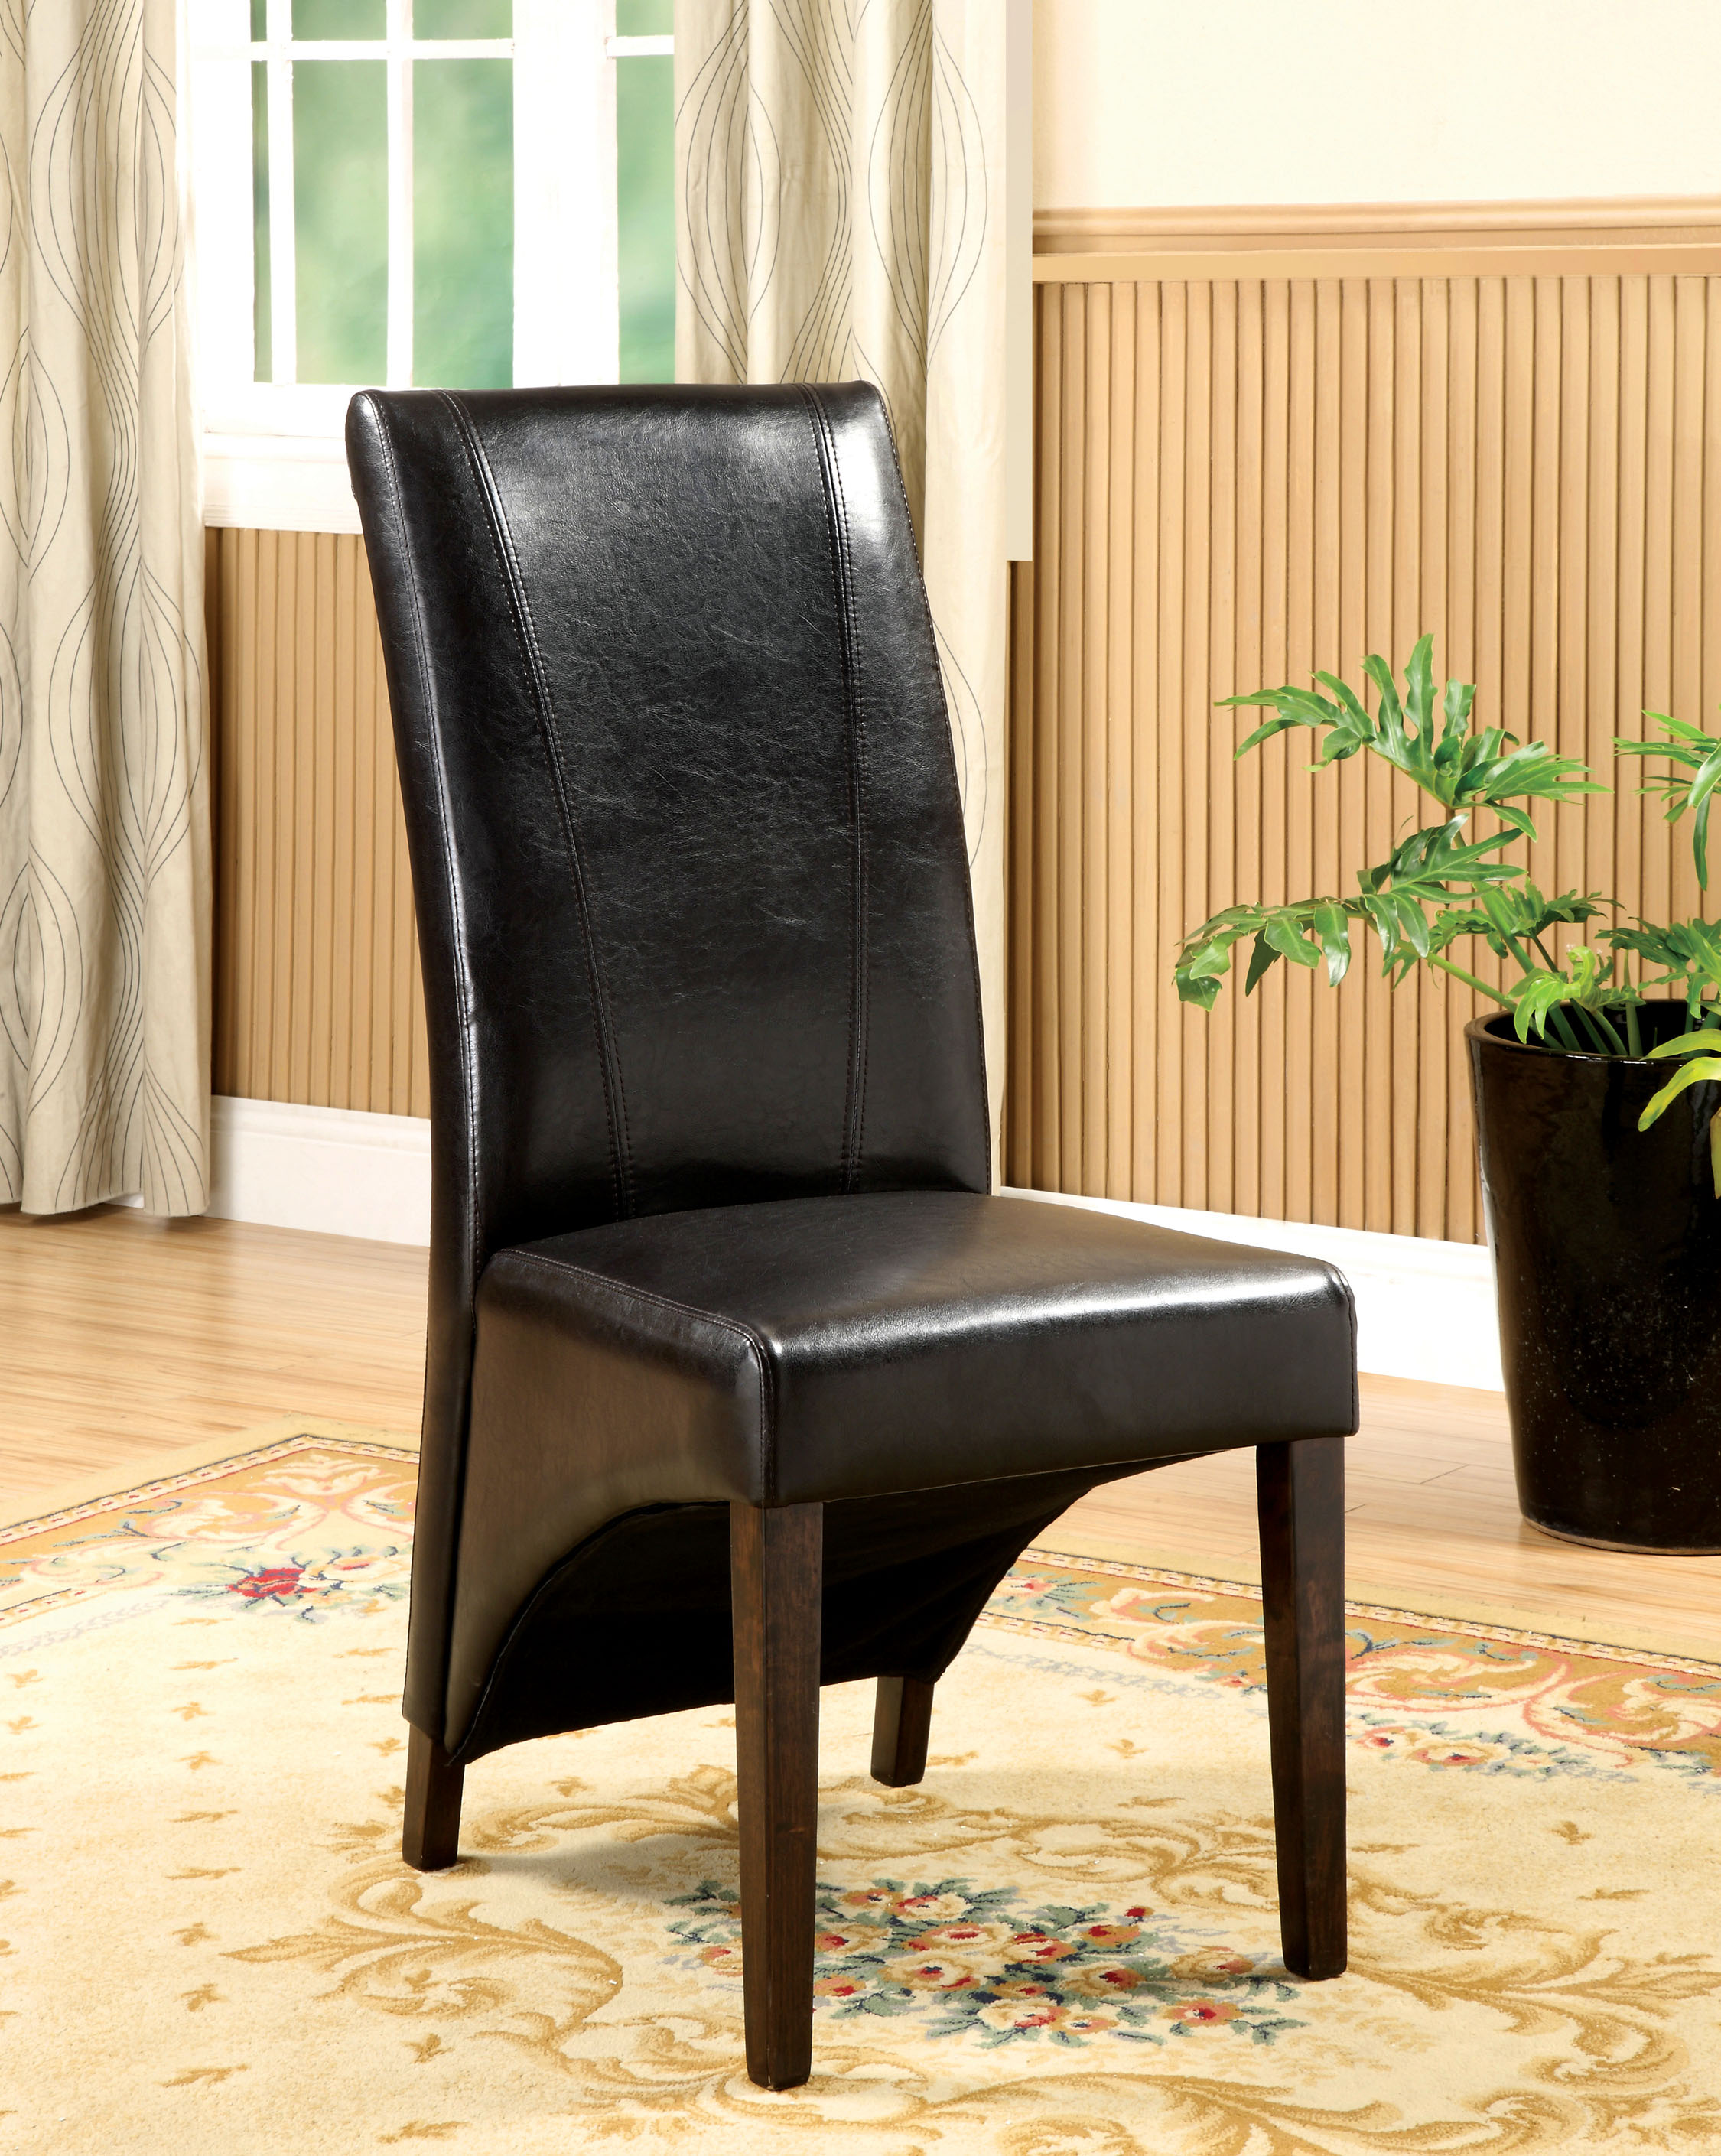 Furniture of America Palenza Black Leatherette Dining Chair (Set of 2)